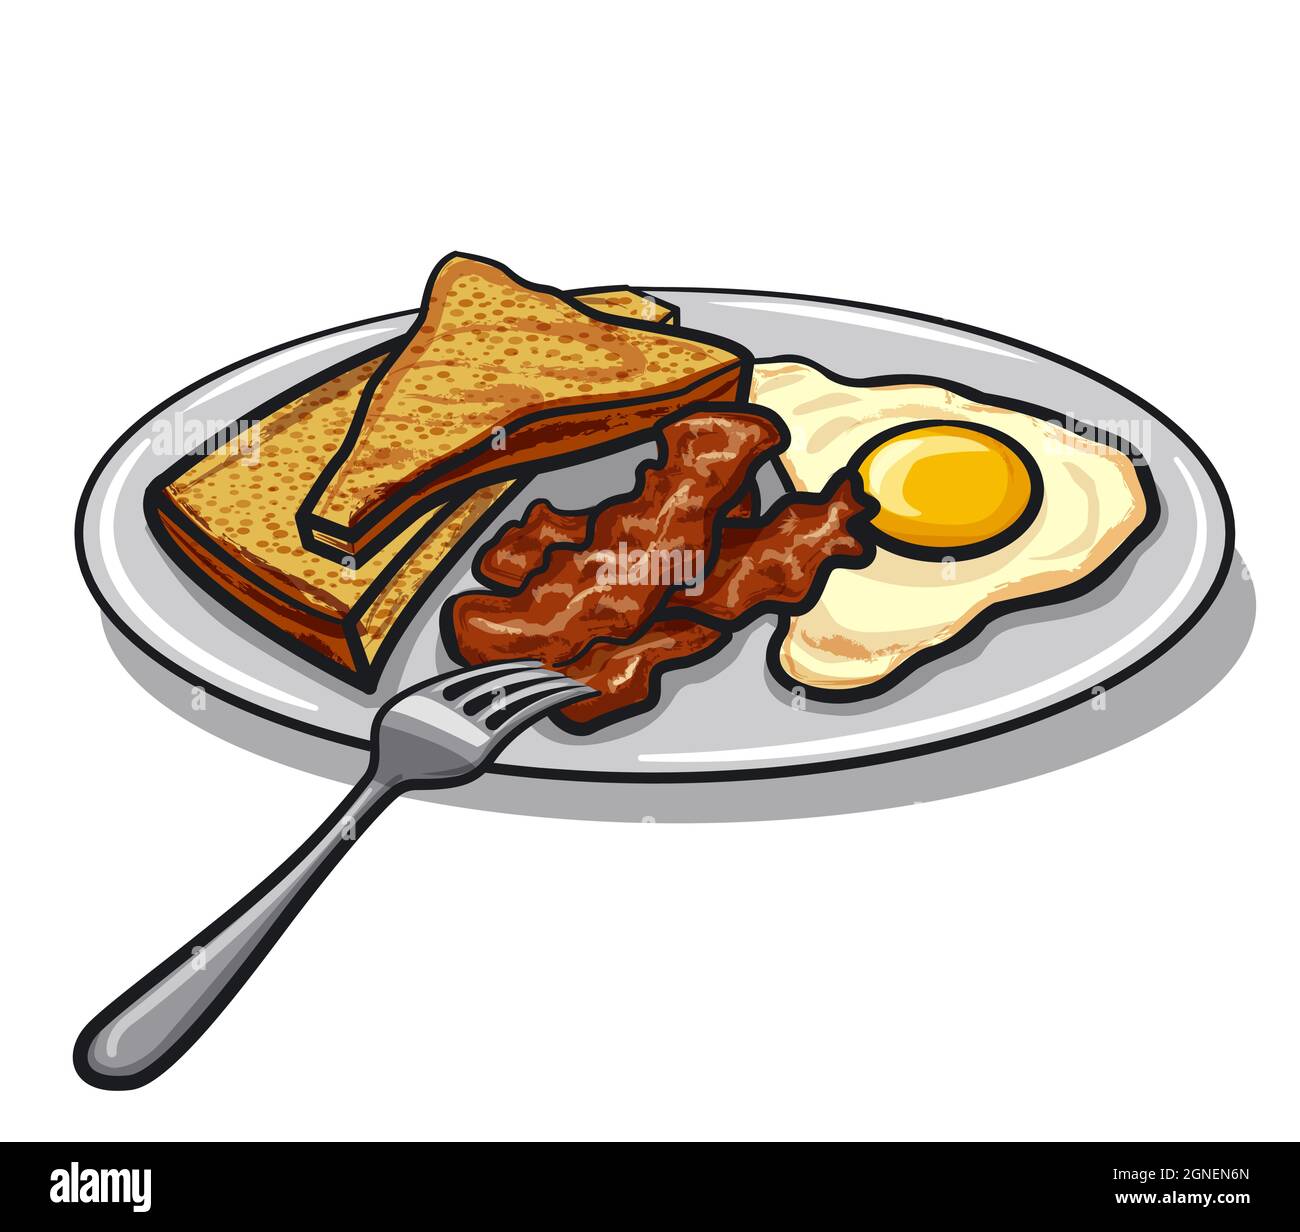 Illustration of the roast bacon, egg and toasts on the plate Stock Vector